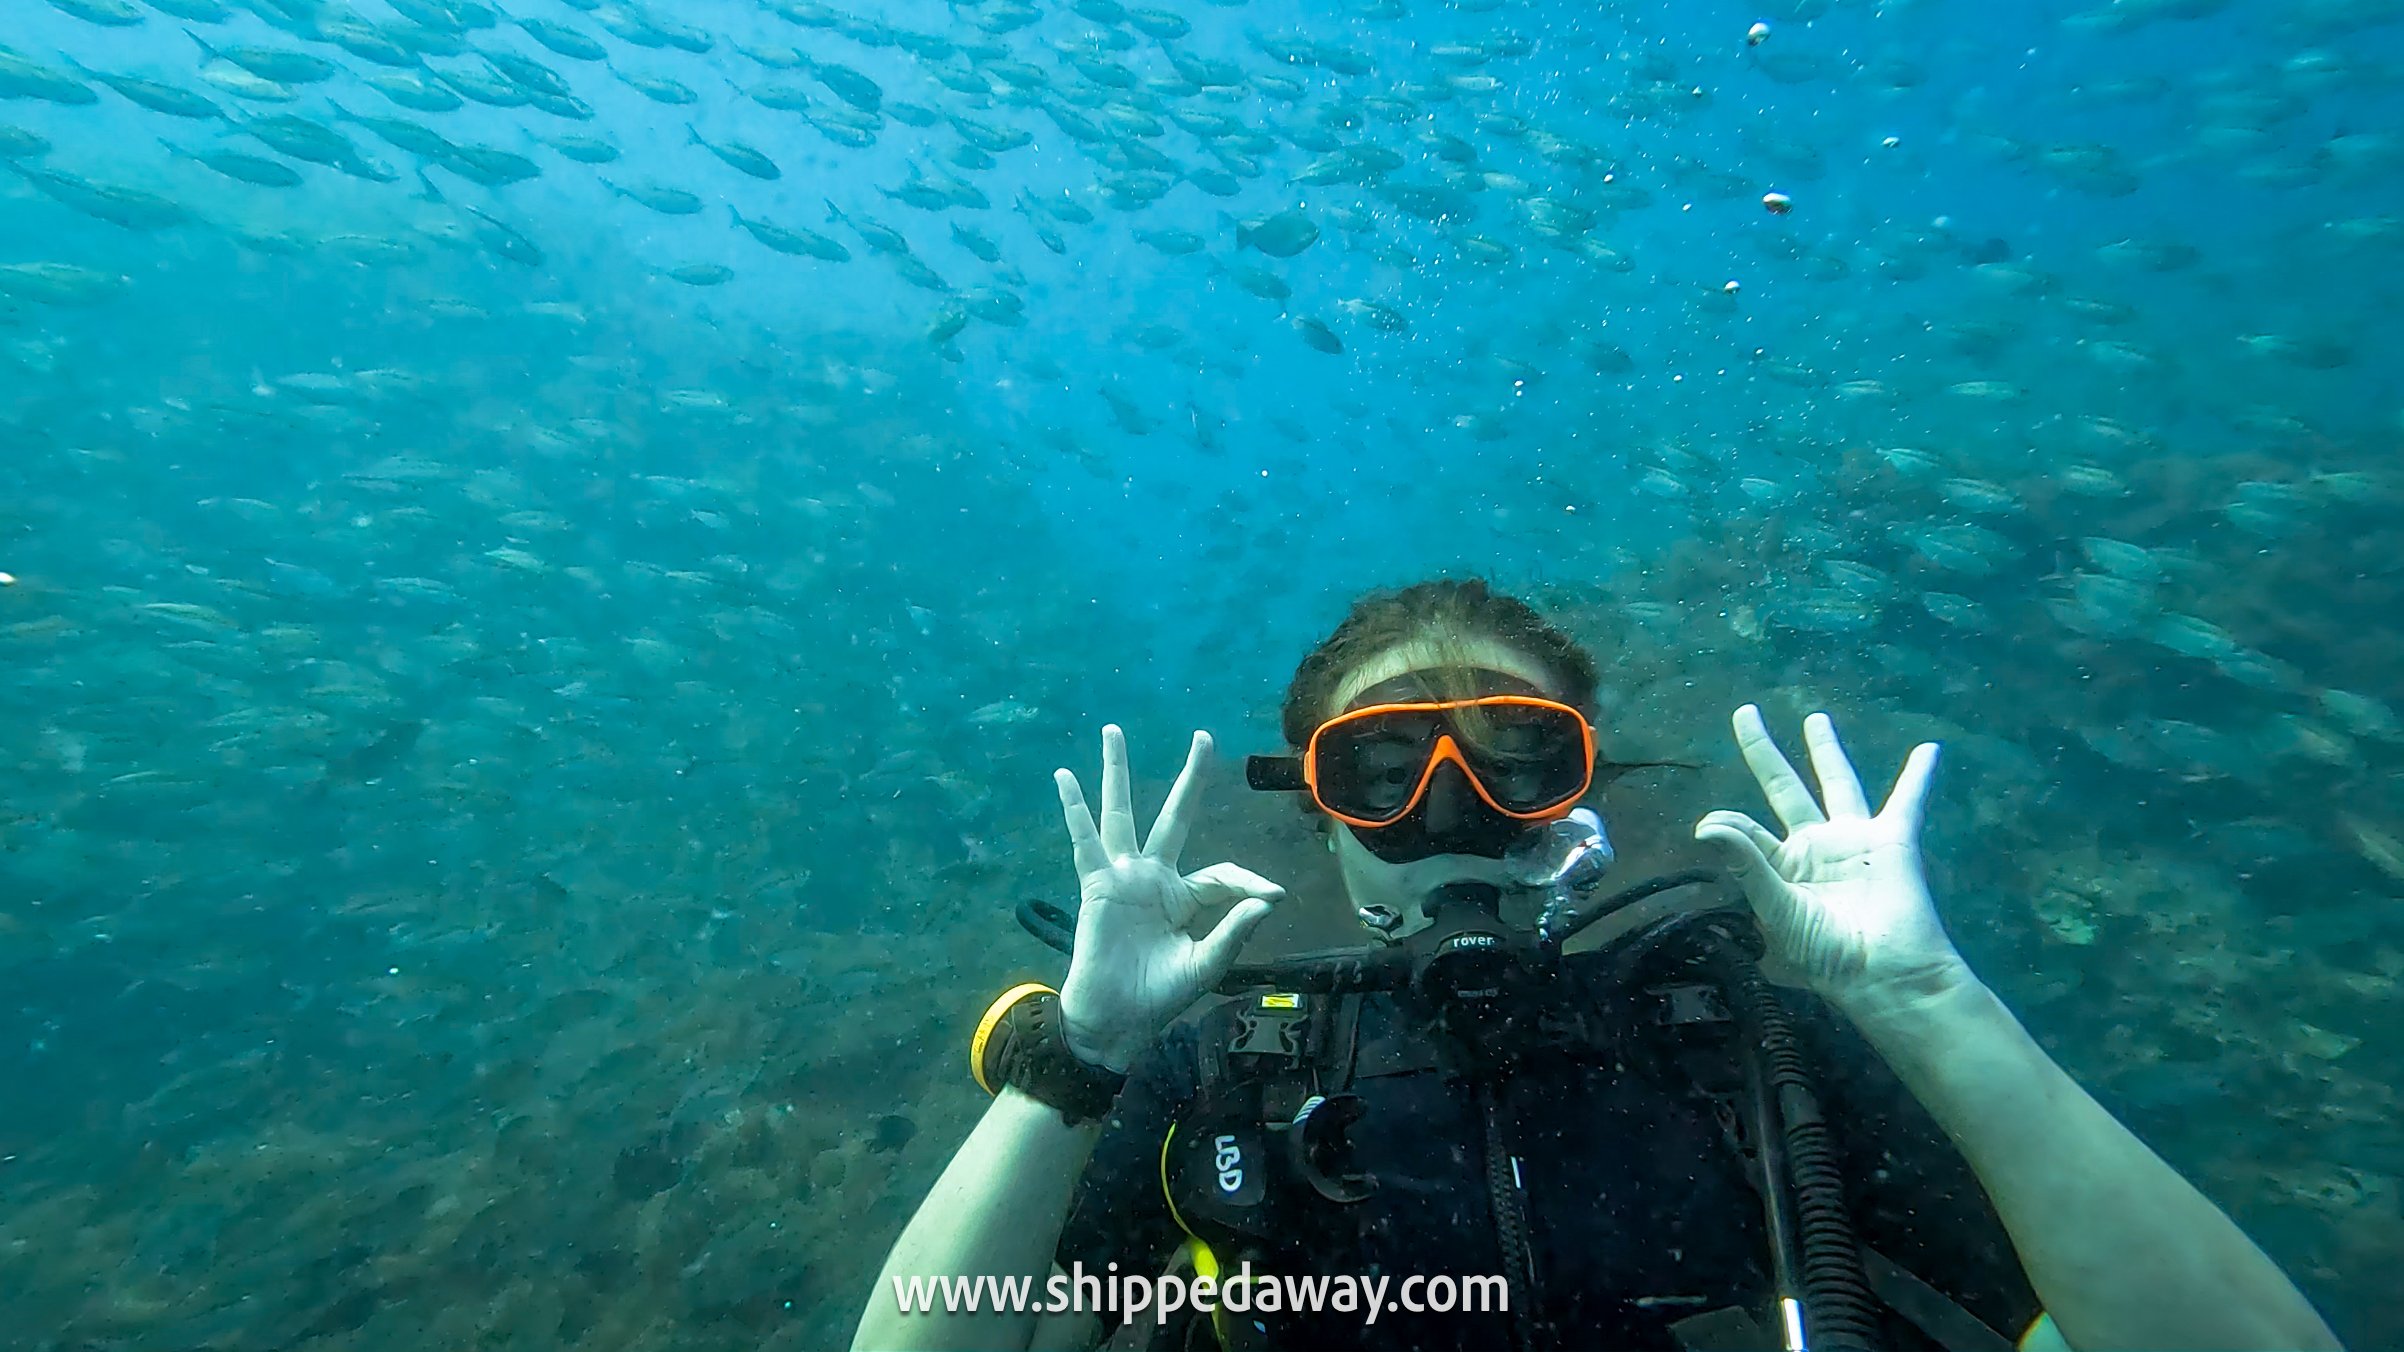 Scuba Diving among schools of fish in Koh Tao, Thailand